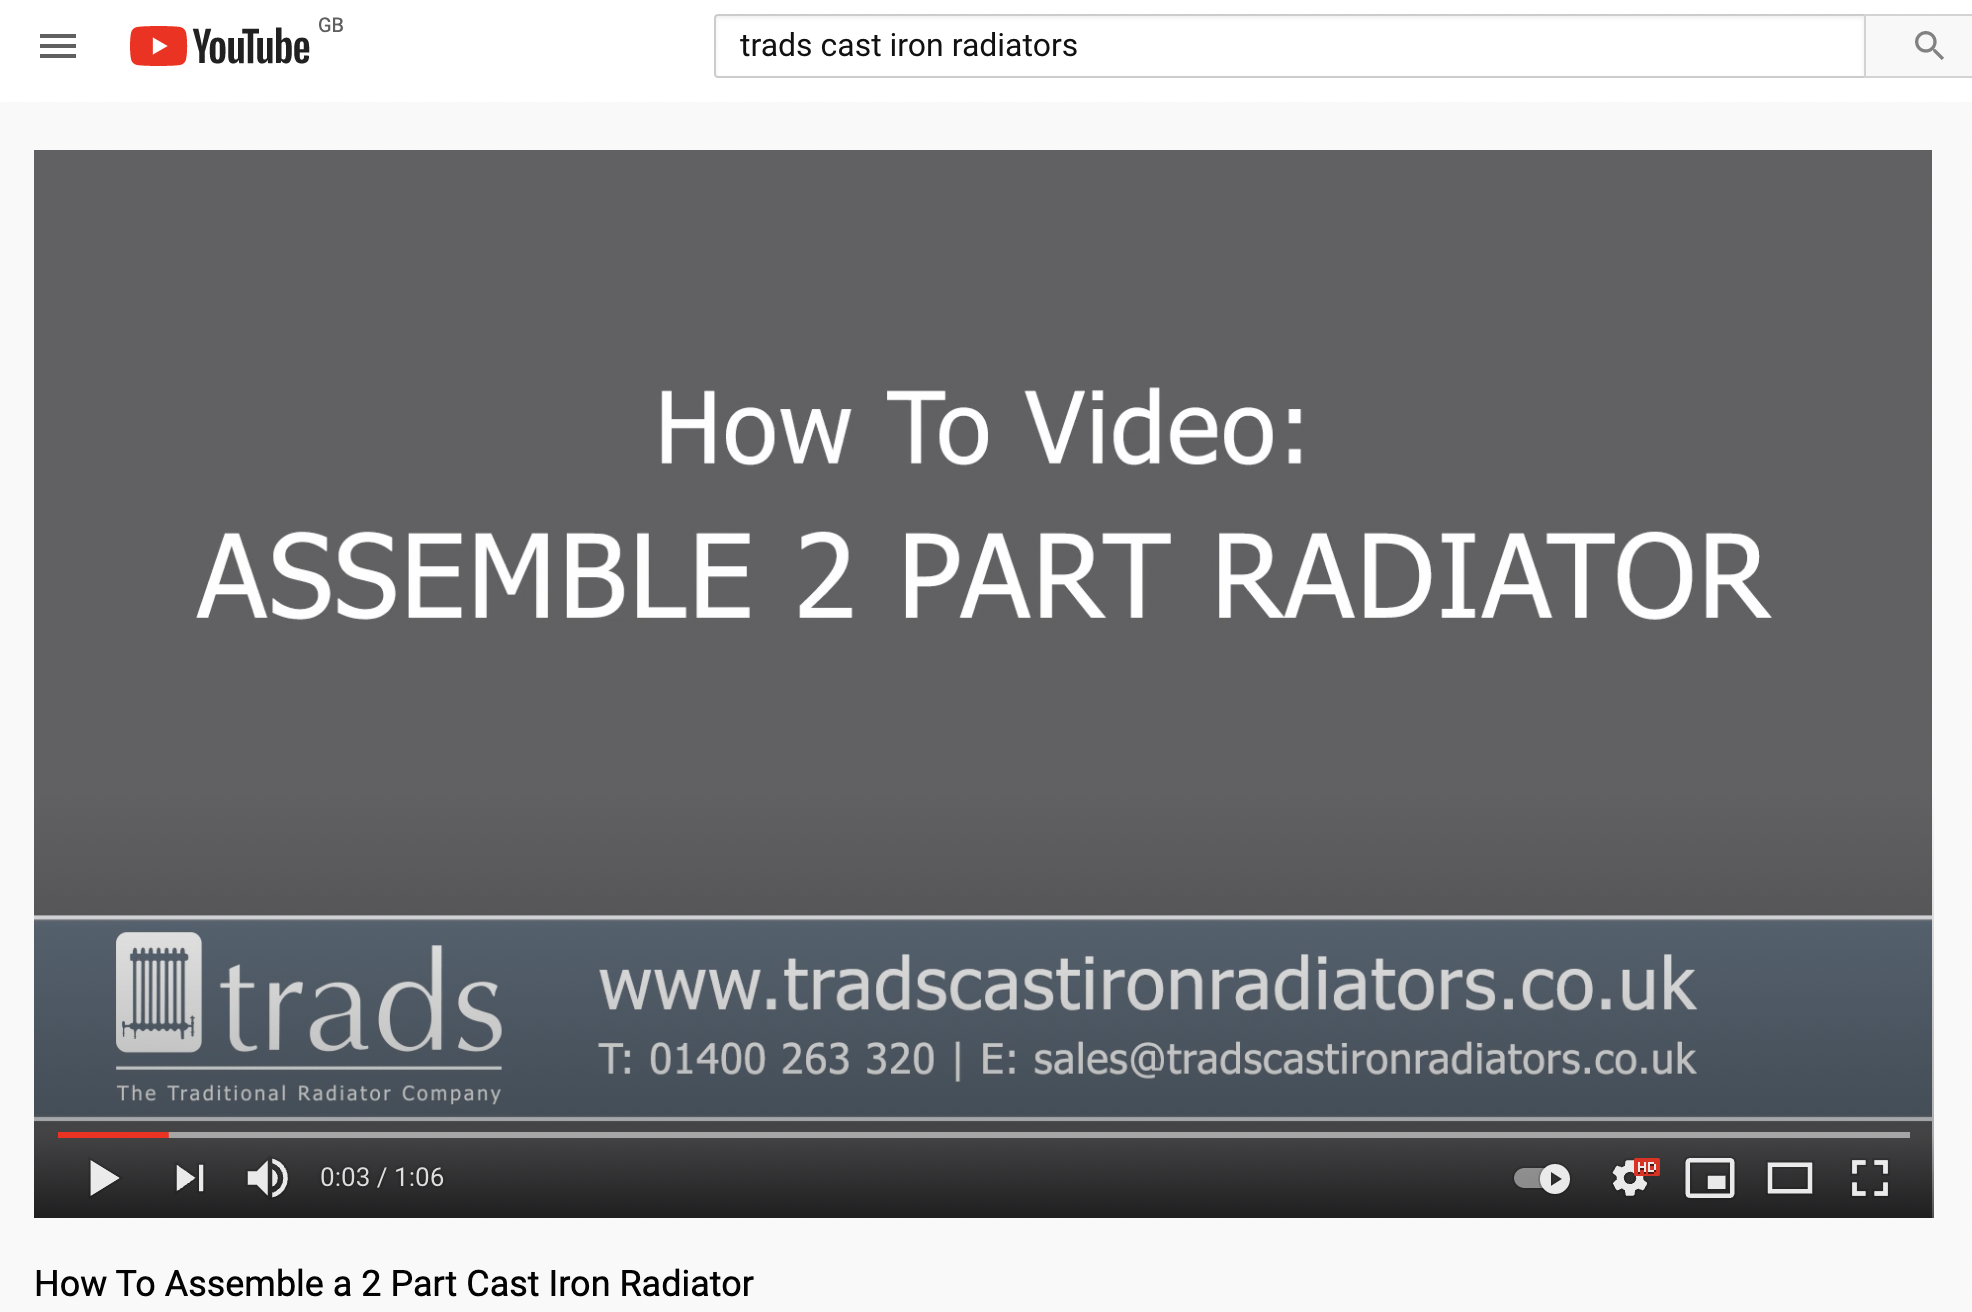 How to assemble 2 part radiator